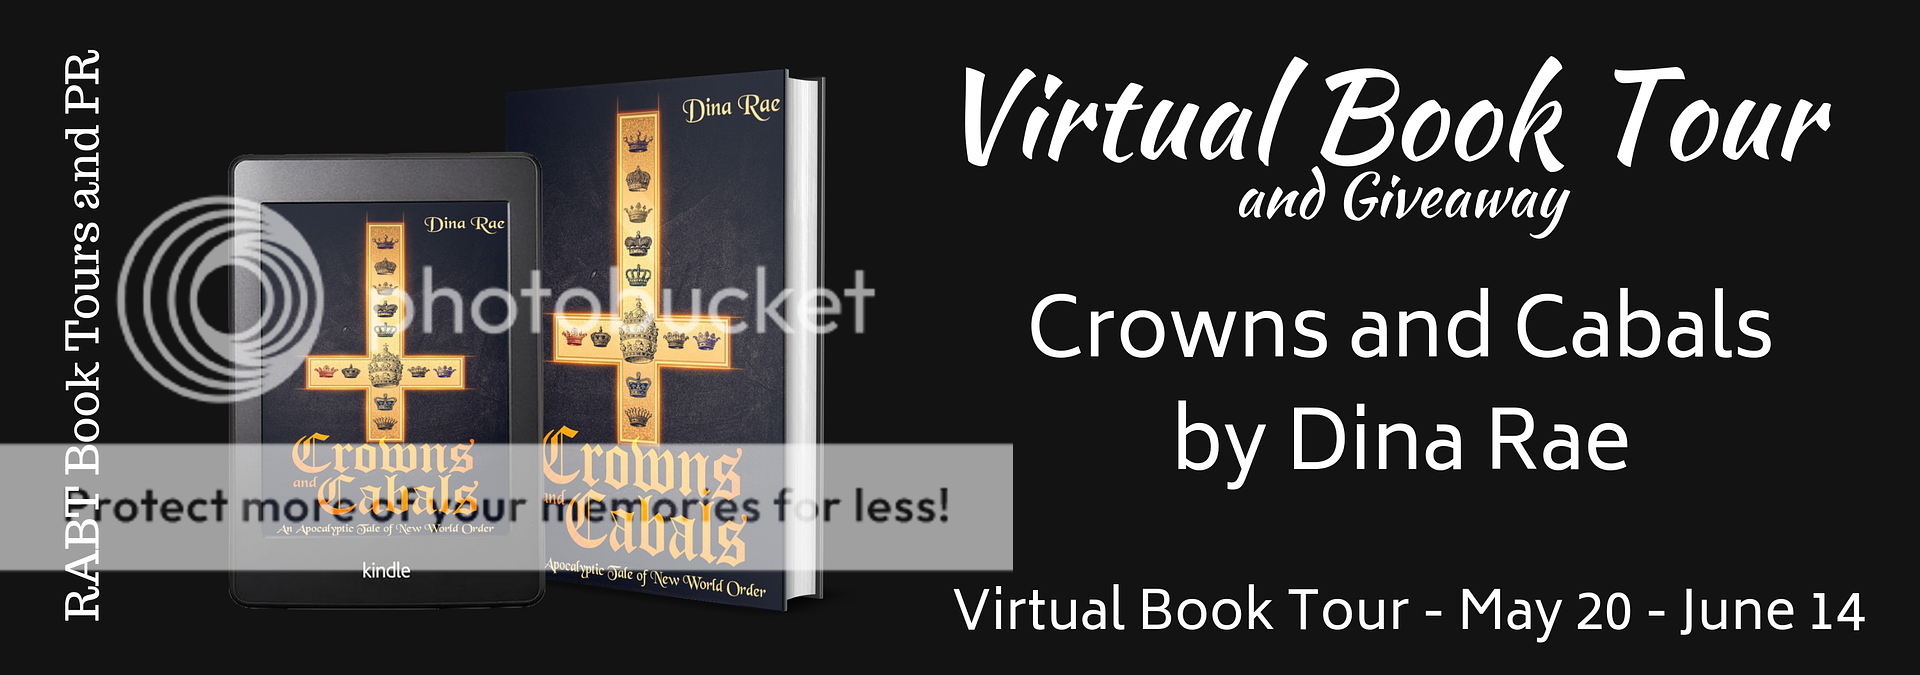 Virtual Book Tour: Crowns and Cabals by Dina Rae @HalooftheDamned #interview with the #author and a #giveaway #scifi #dystopian #christian @RABTBookTours